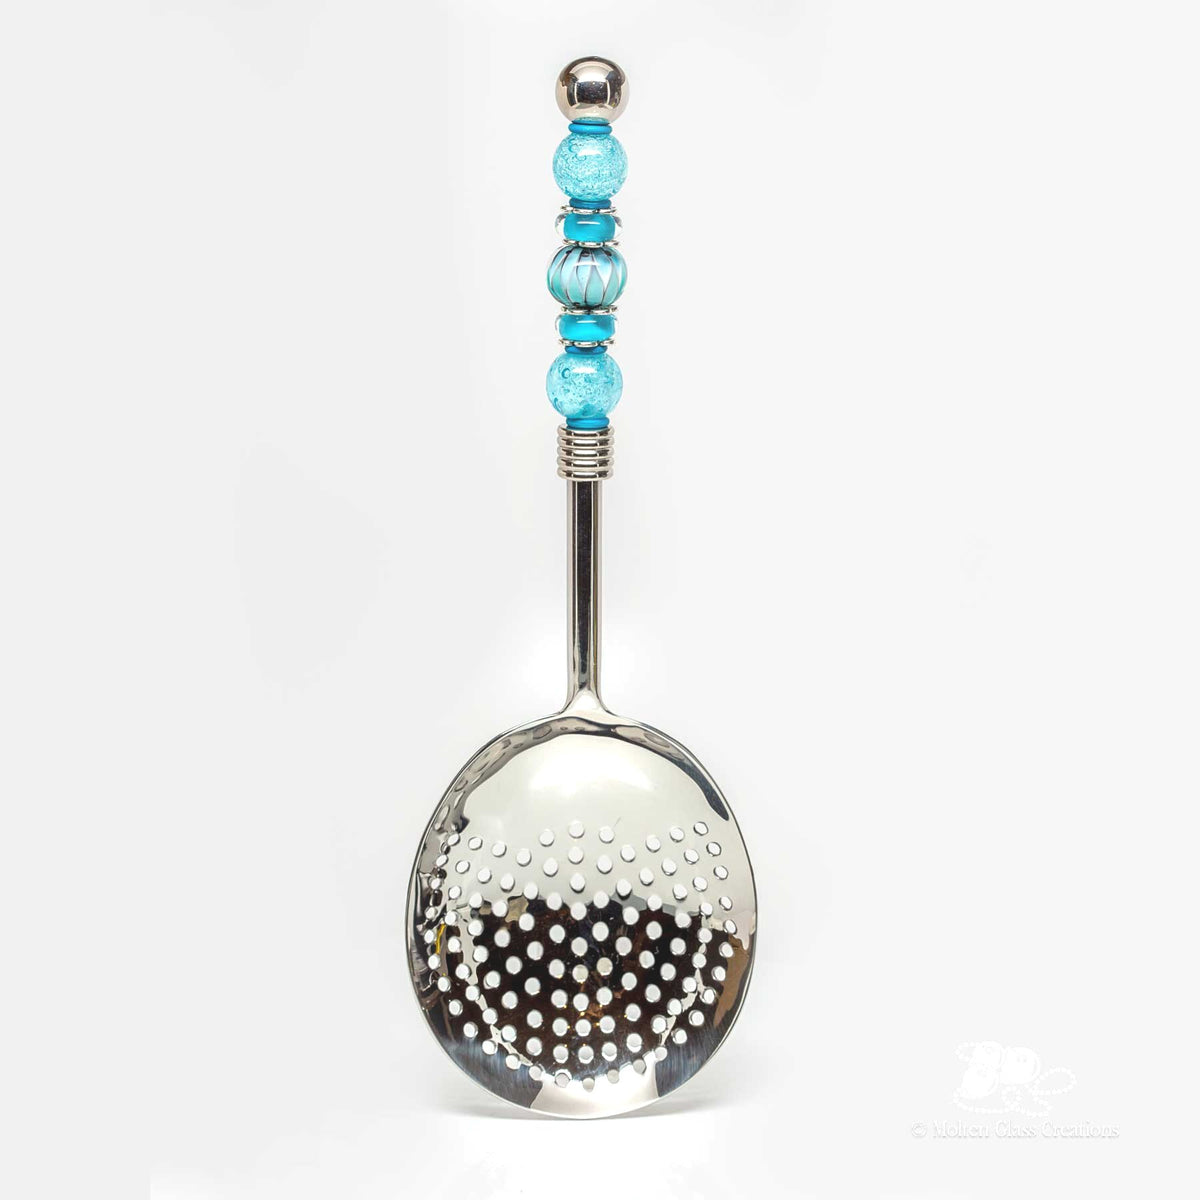 Vegetable Strainer Spoon - Blue Bead Handle - Molten Glass Creations